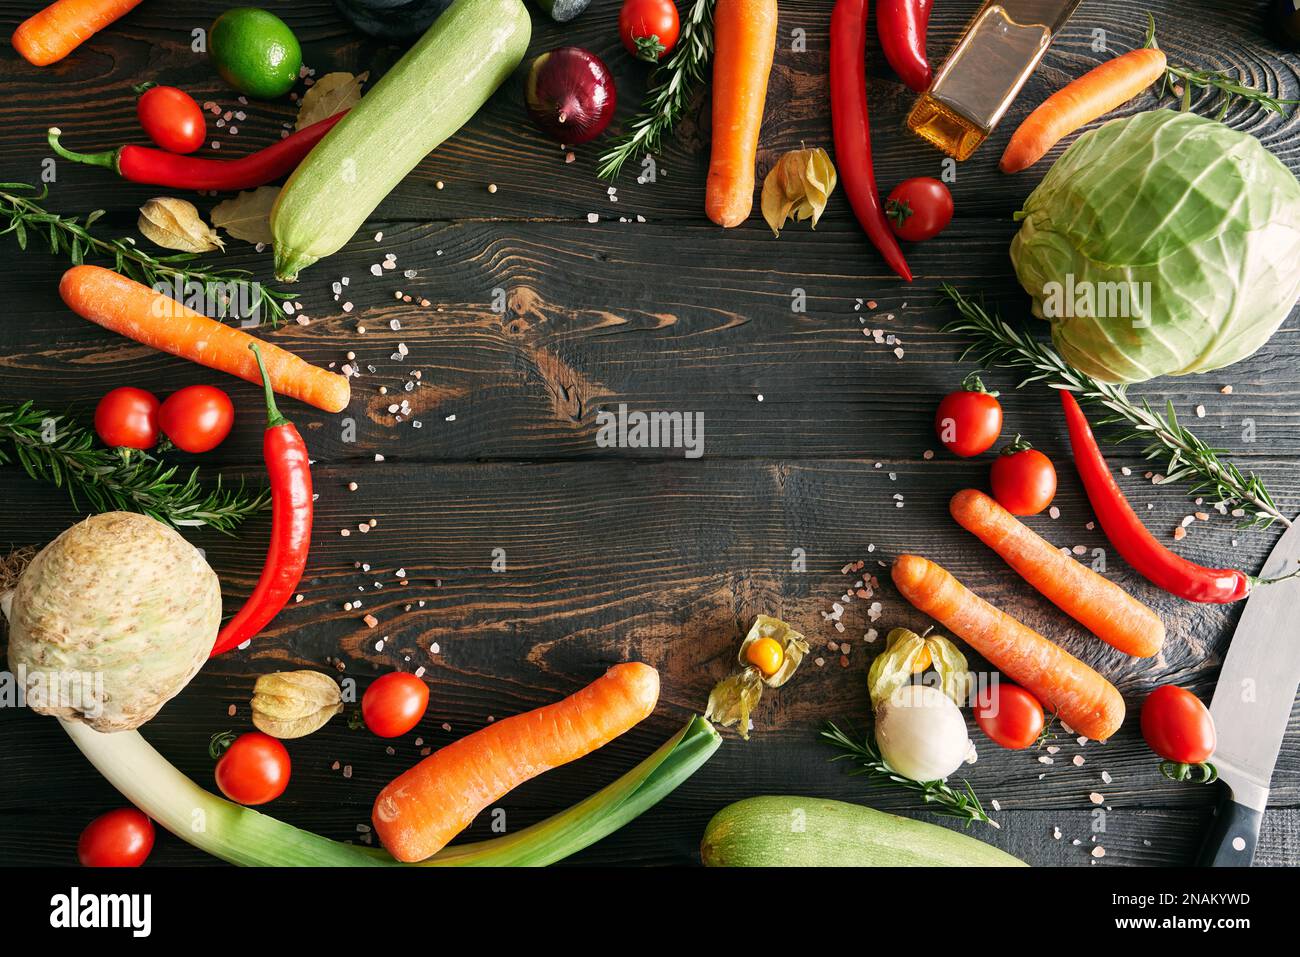 Assorted raw organic vegetables on dark wooden background with copy space. Food styling, culinary, healthy eating concept. Frame style, top view Stock Photo